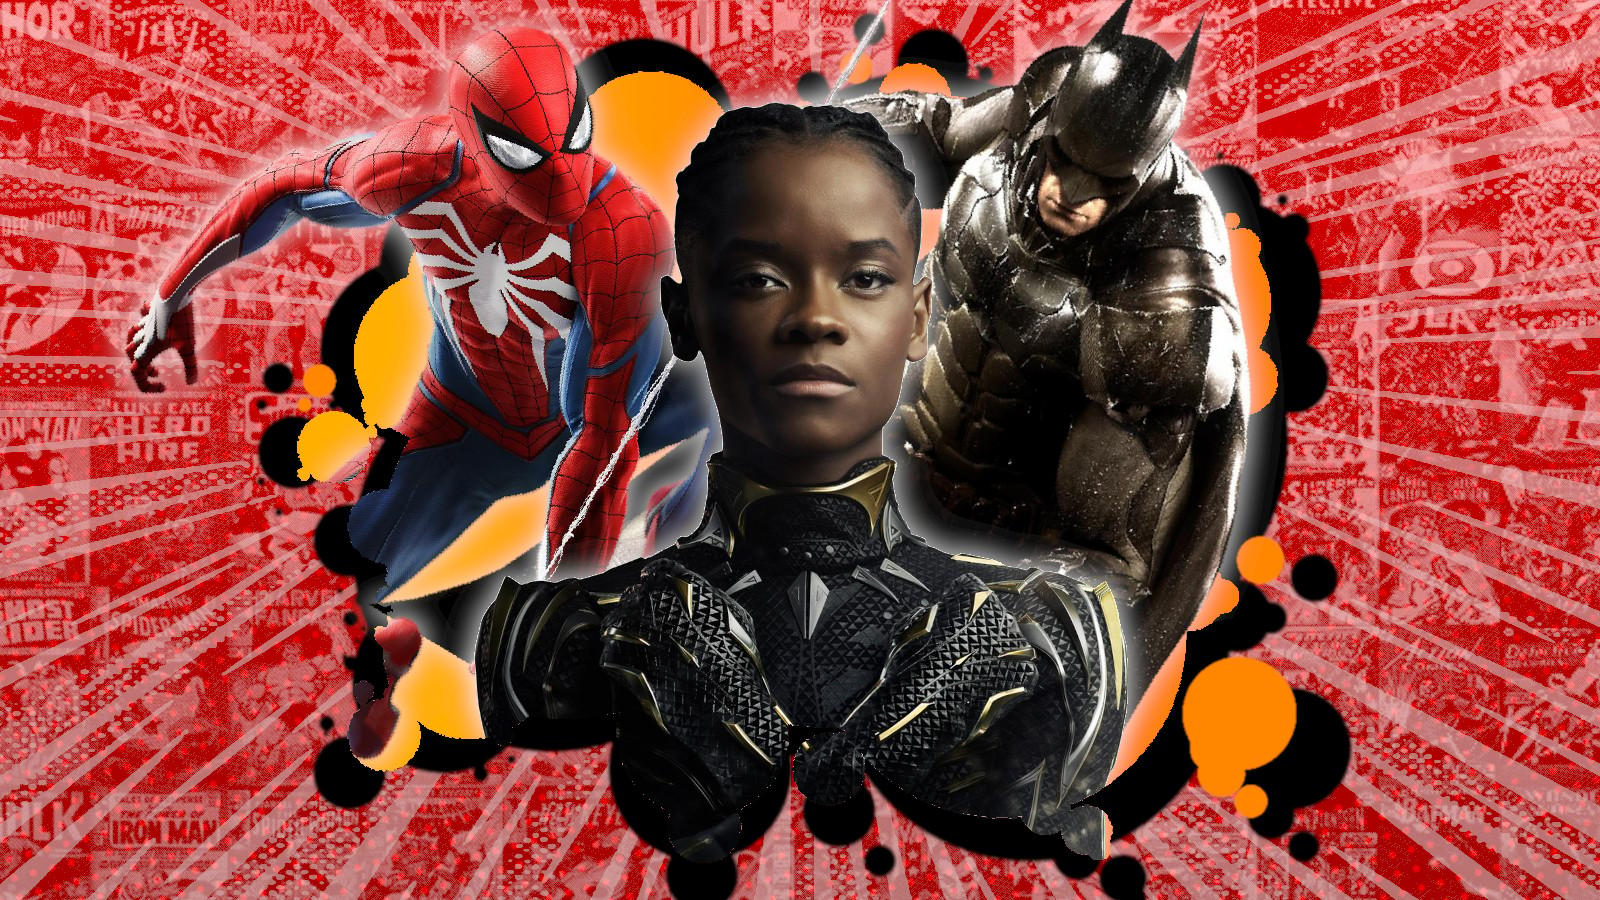 Spider-Man, Black Panther, and Batman lead our coverage of HeroFest a week celebrating superheroes